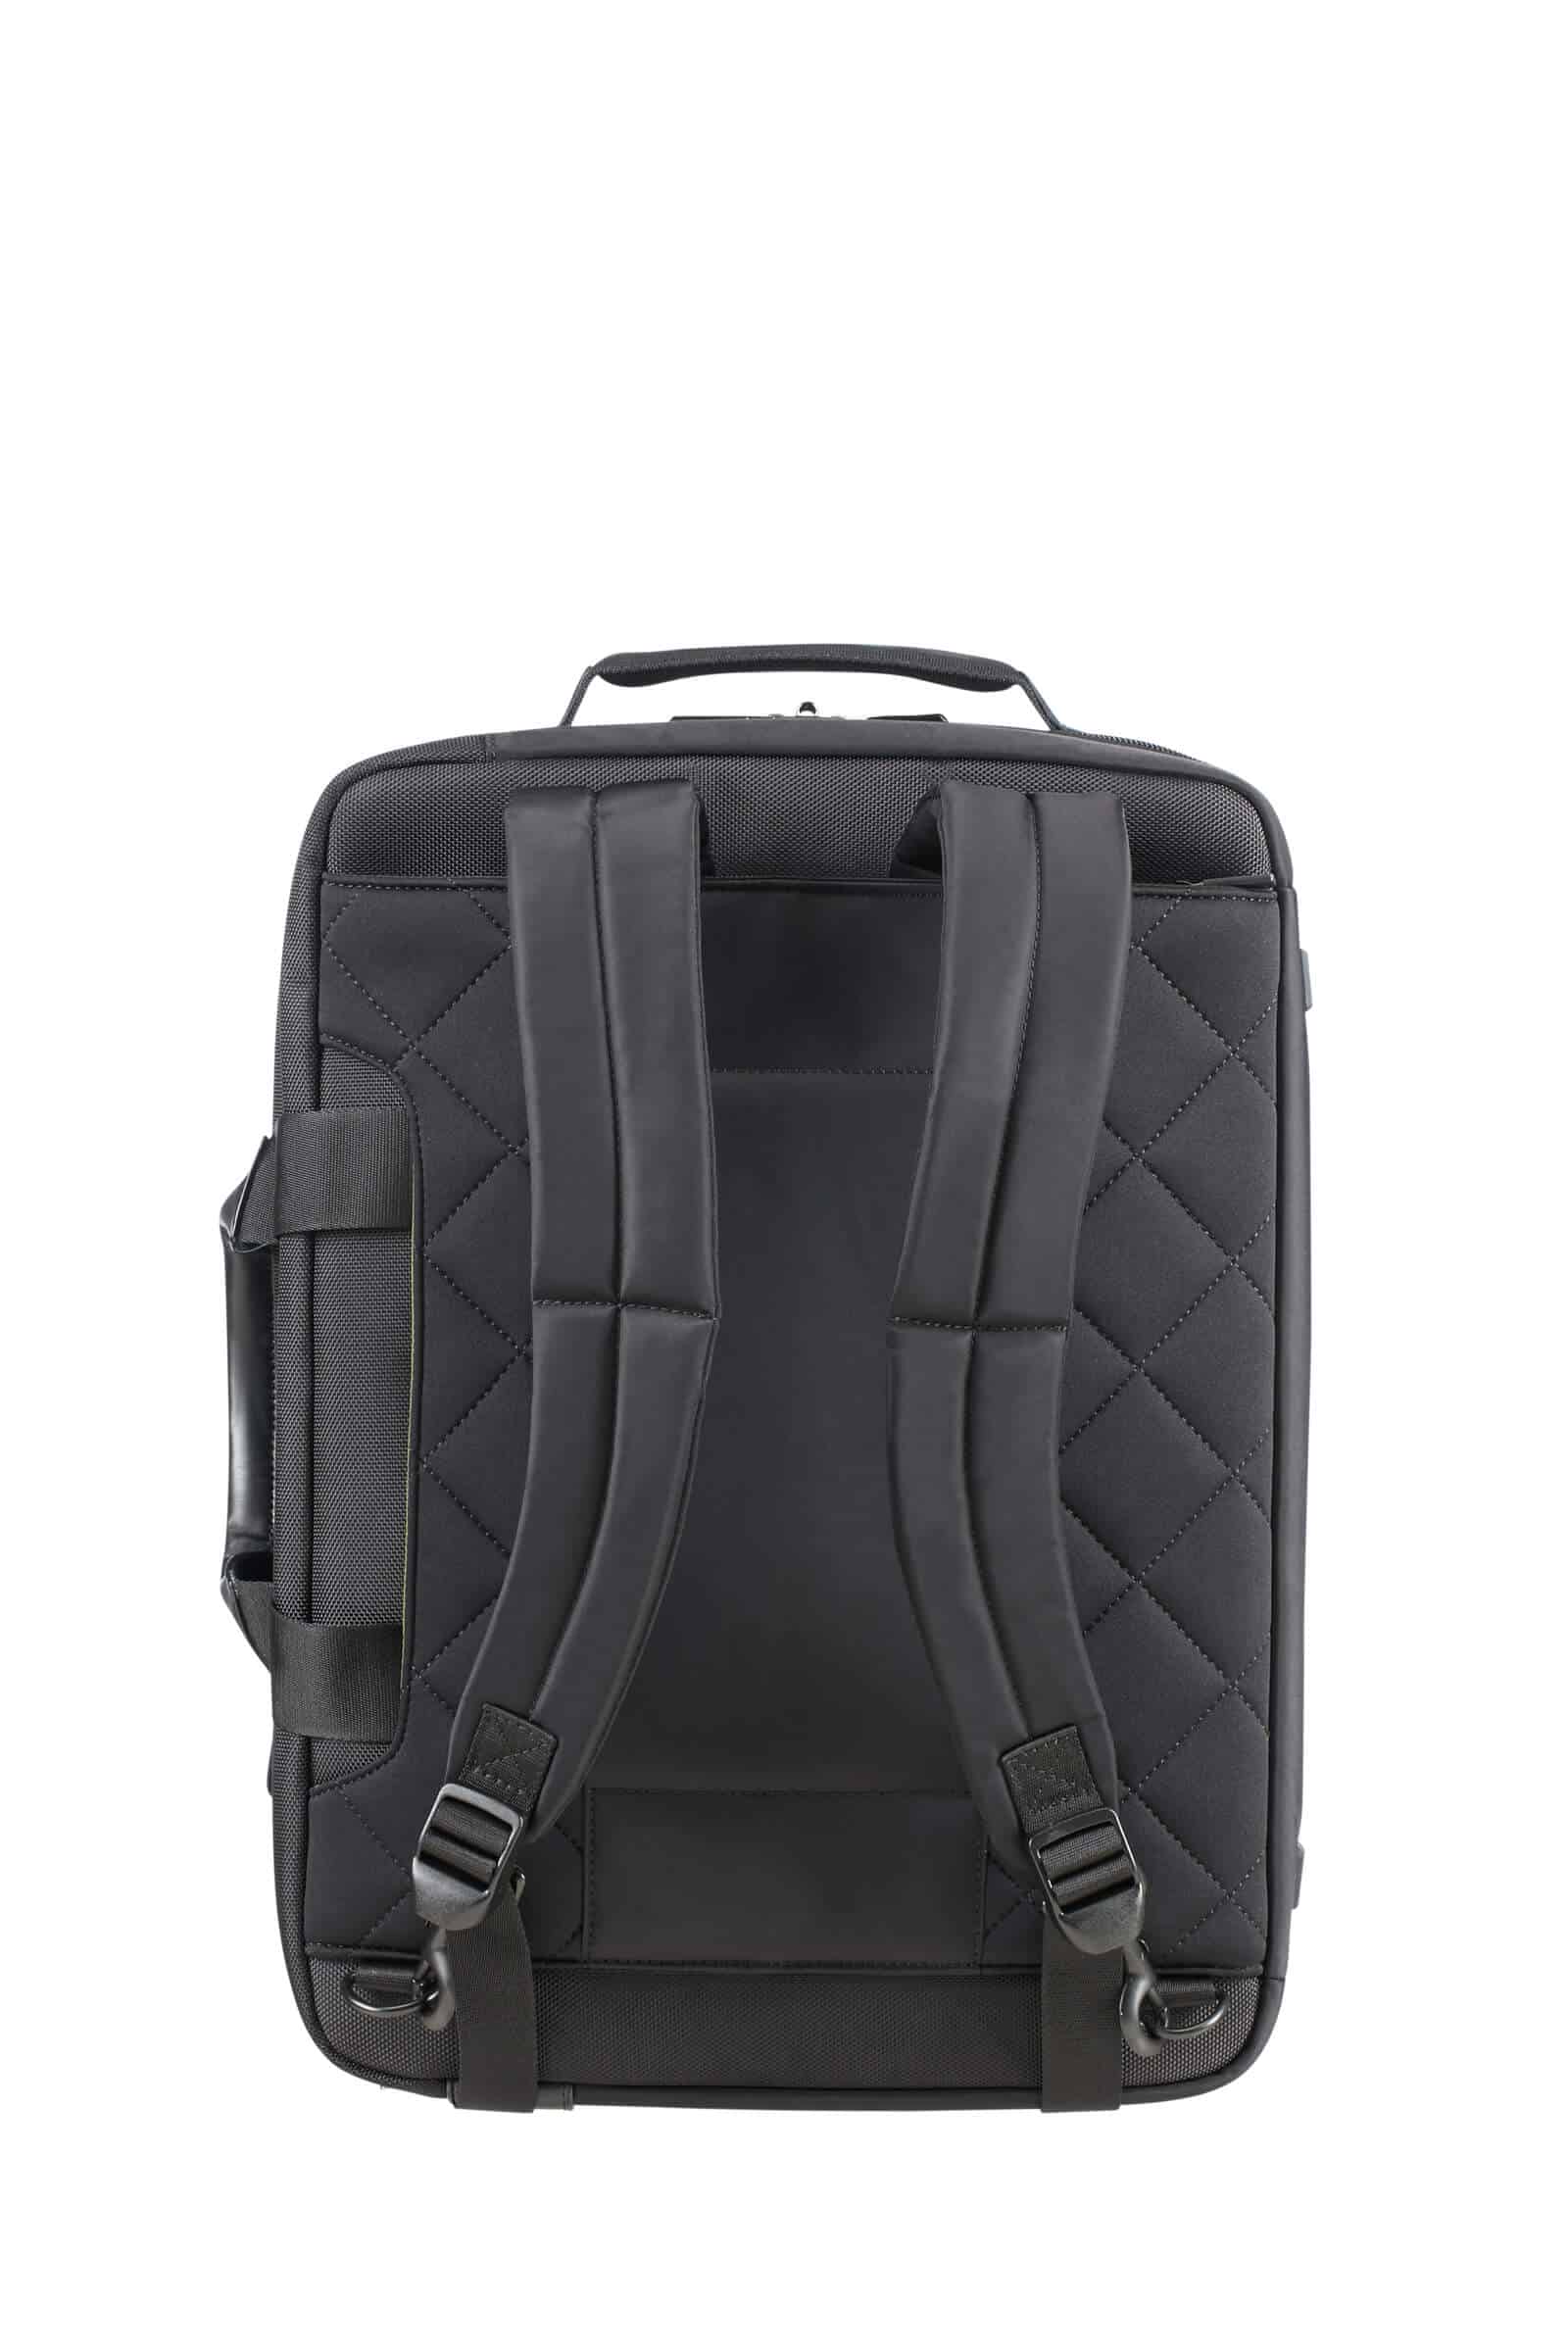 Samsonite Egypt - The Bags No.1 in Egypt Travel bag Backpack Cross bags  Laptop bags Openroad 3 Way